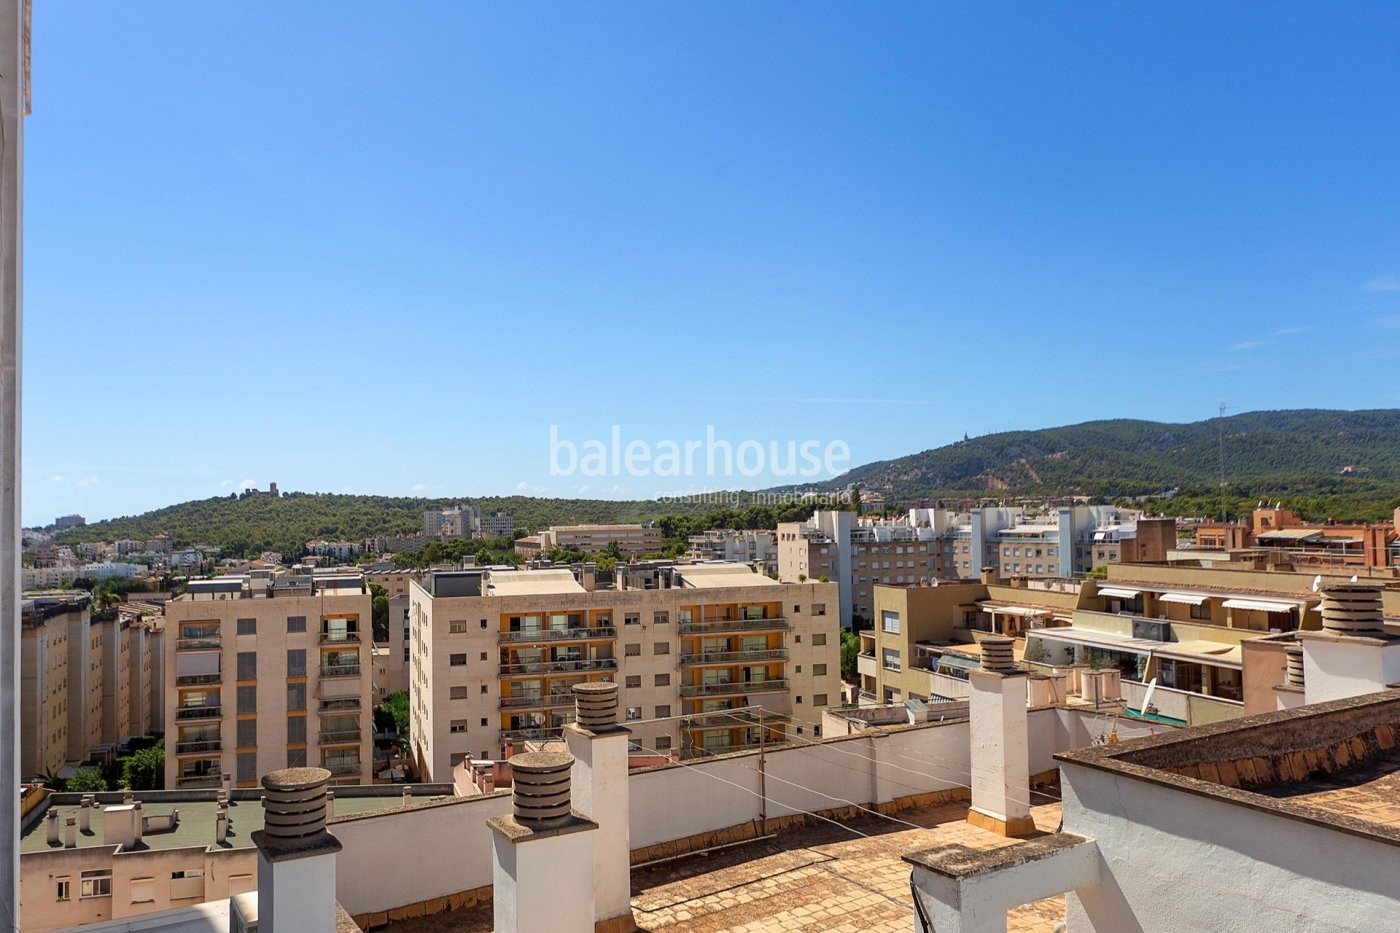 Modern, light-filled penthouse in the school area of Palma, with terraces and unobstructed views.